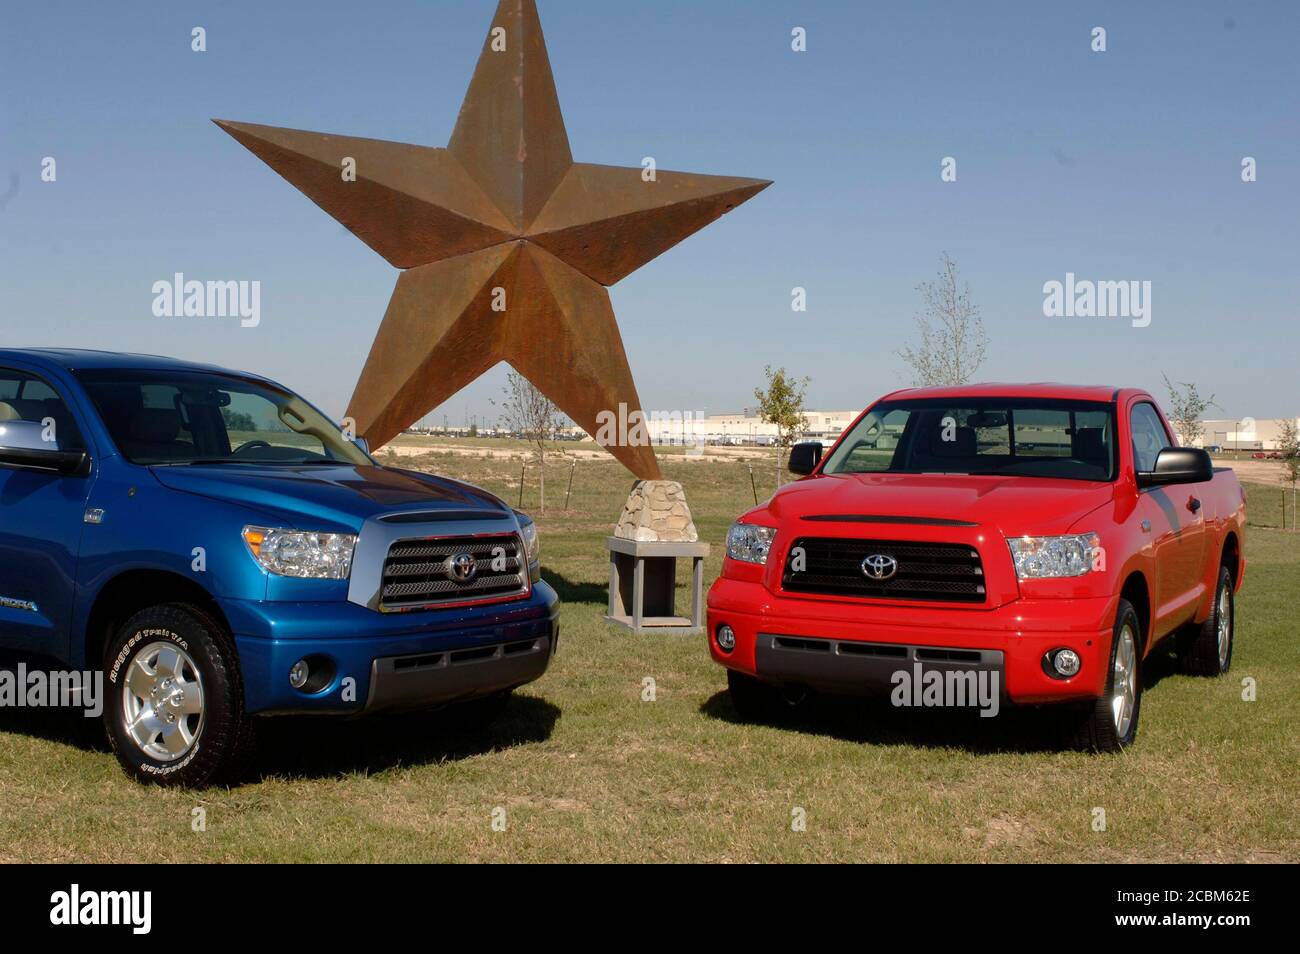 San Antonio, Texas November 17, 2006: The first two Toyota Tundra pickups off the assembly line at Toyota Motor Manufacturing's new south Texas assembly plant in Bexar Count sit near the visitor's center.  The $1.28-billion dollar facility employs about 1,800 workers. ©Bob Daemmrich Stock Photo